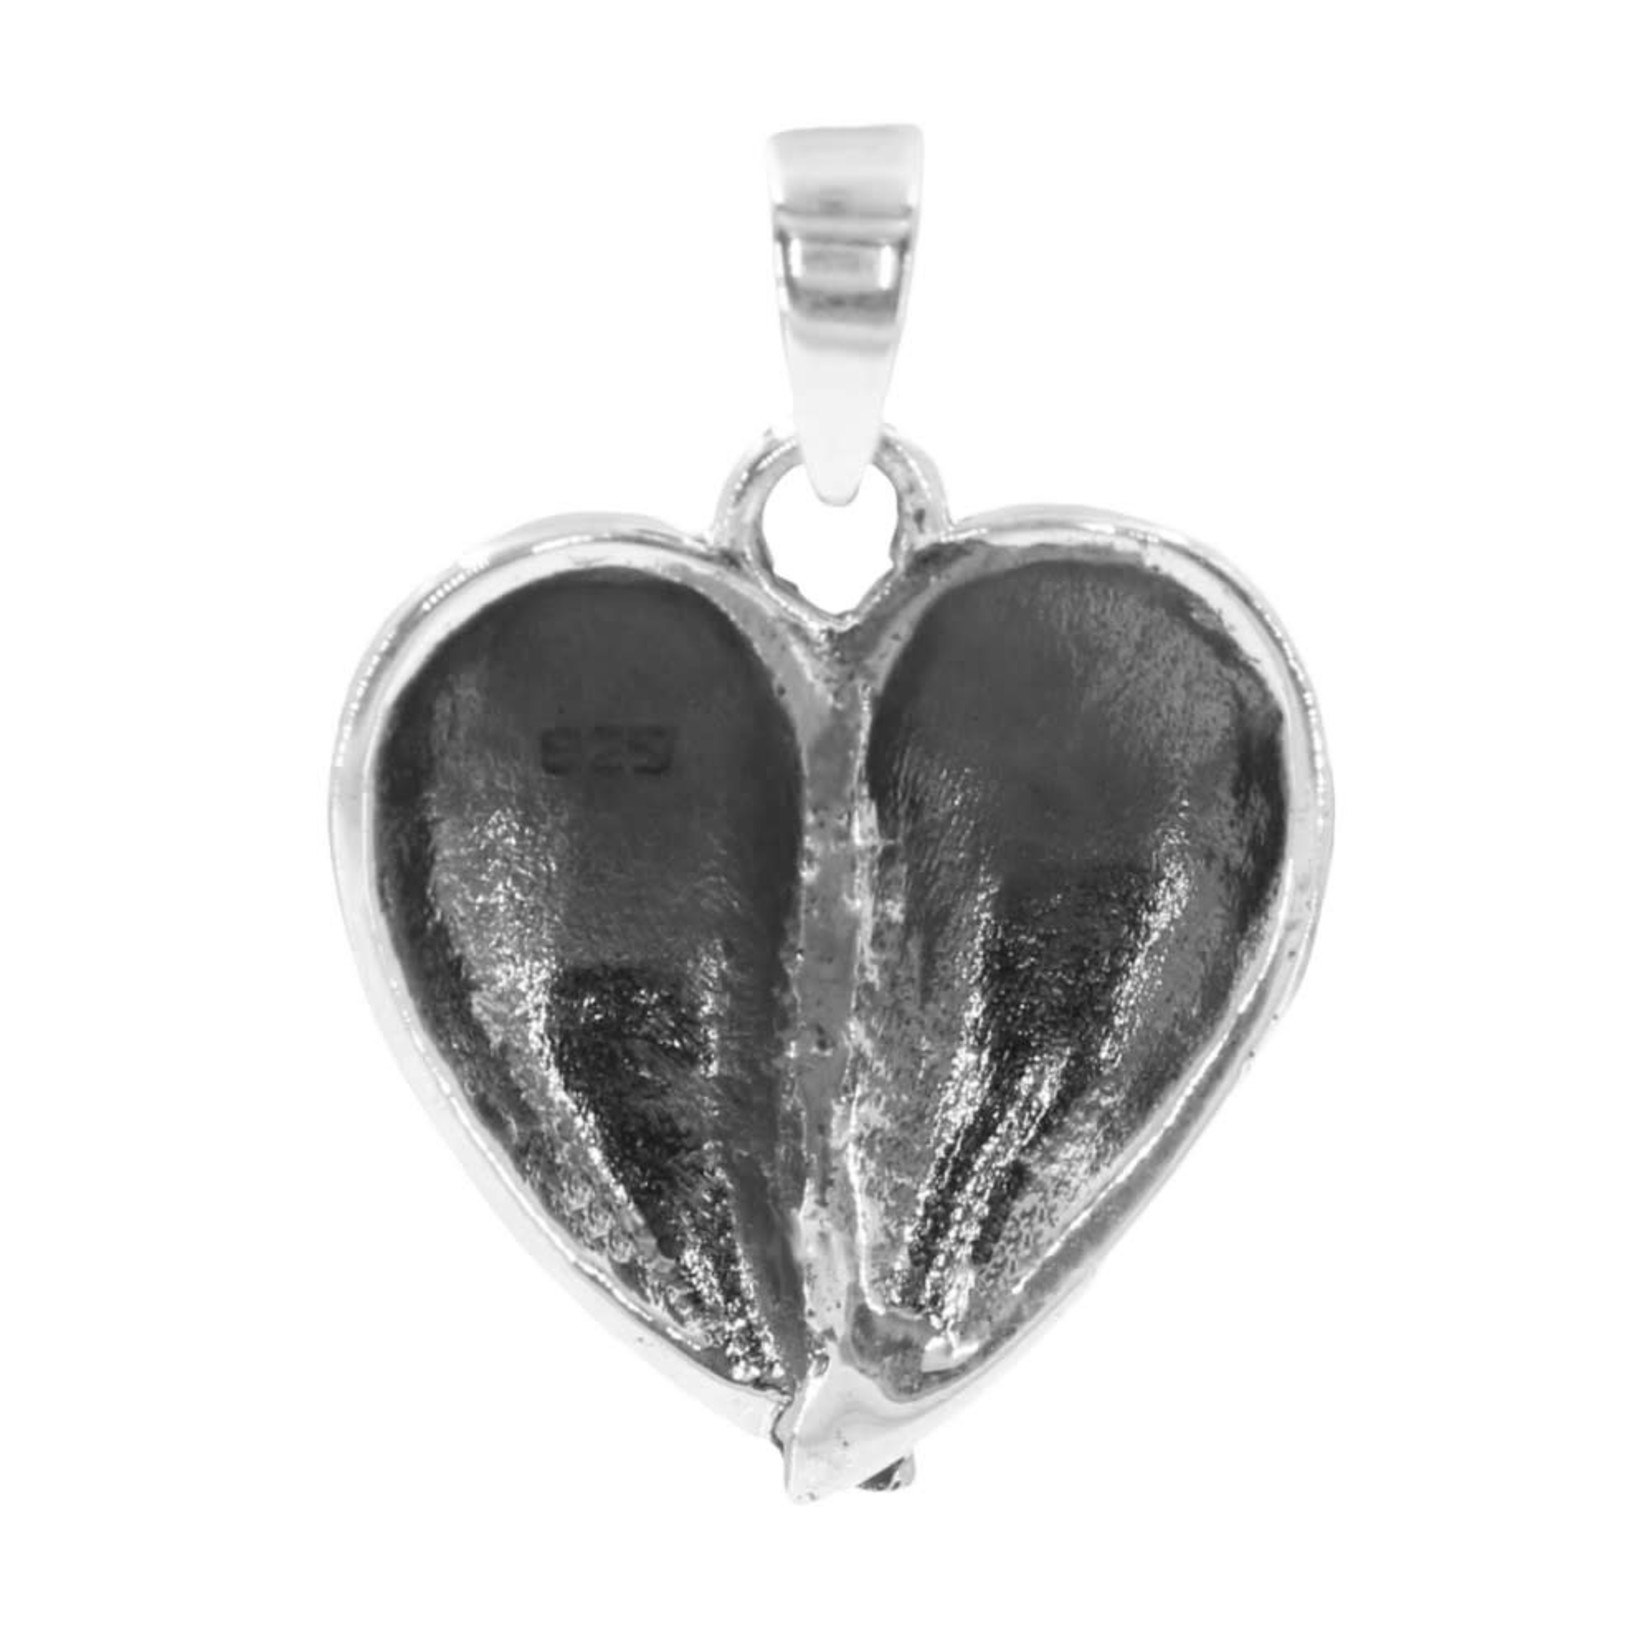 Trufili Vintage Inspired Heart Shaped Angel Wing Necklace